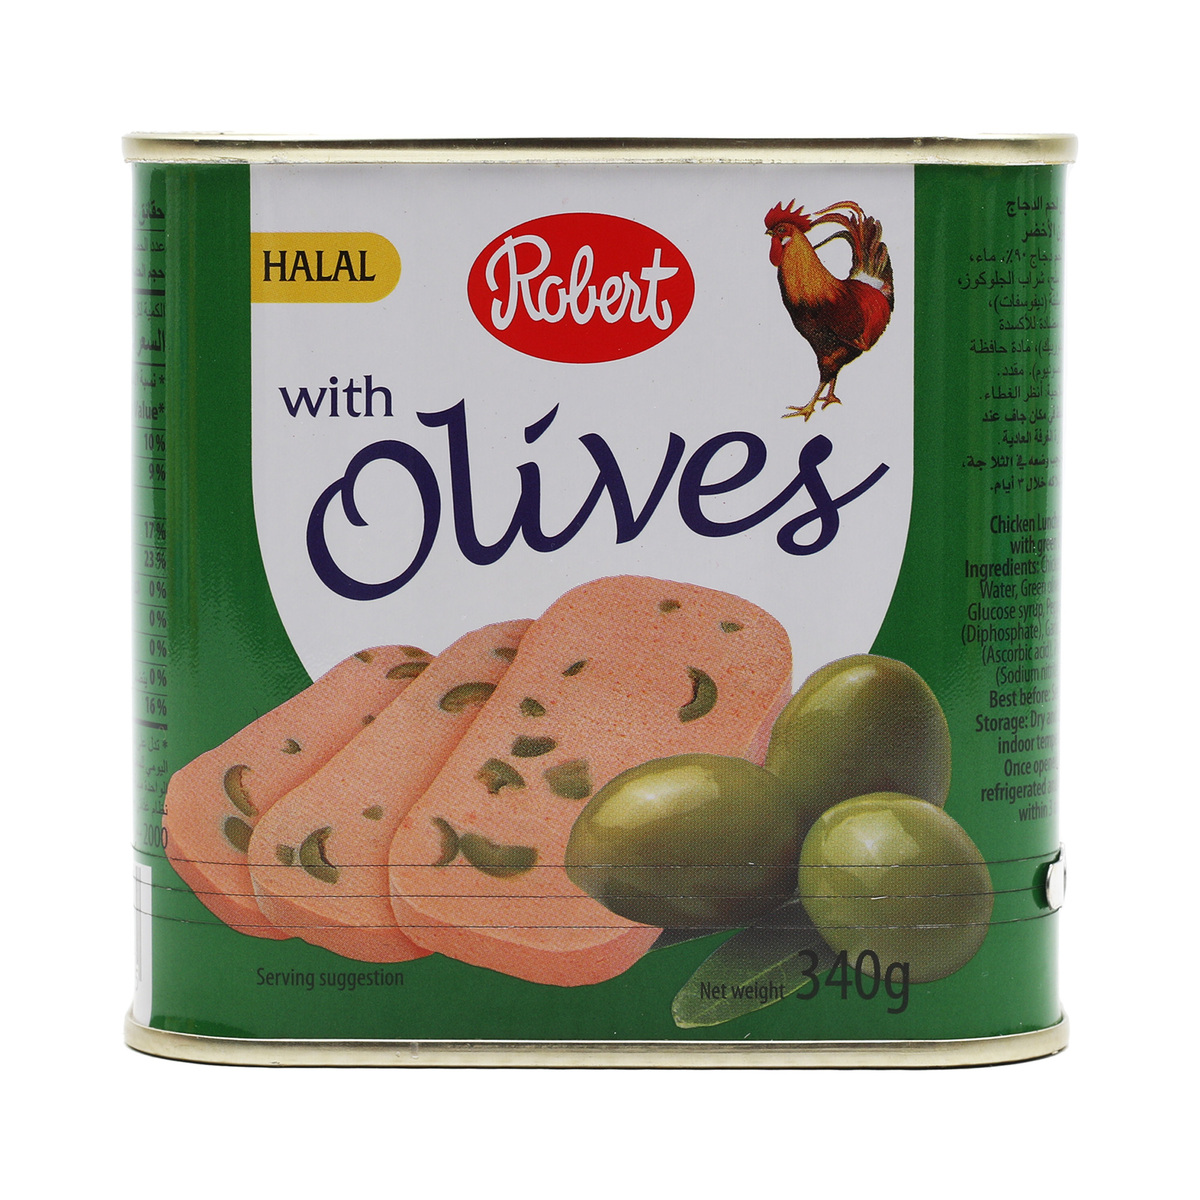 Robert Chicken Luncheon Meat With Olives 340g